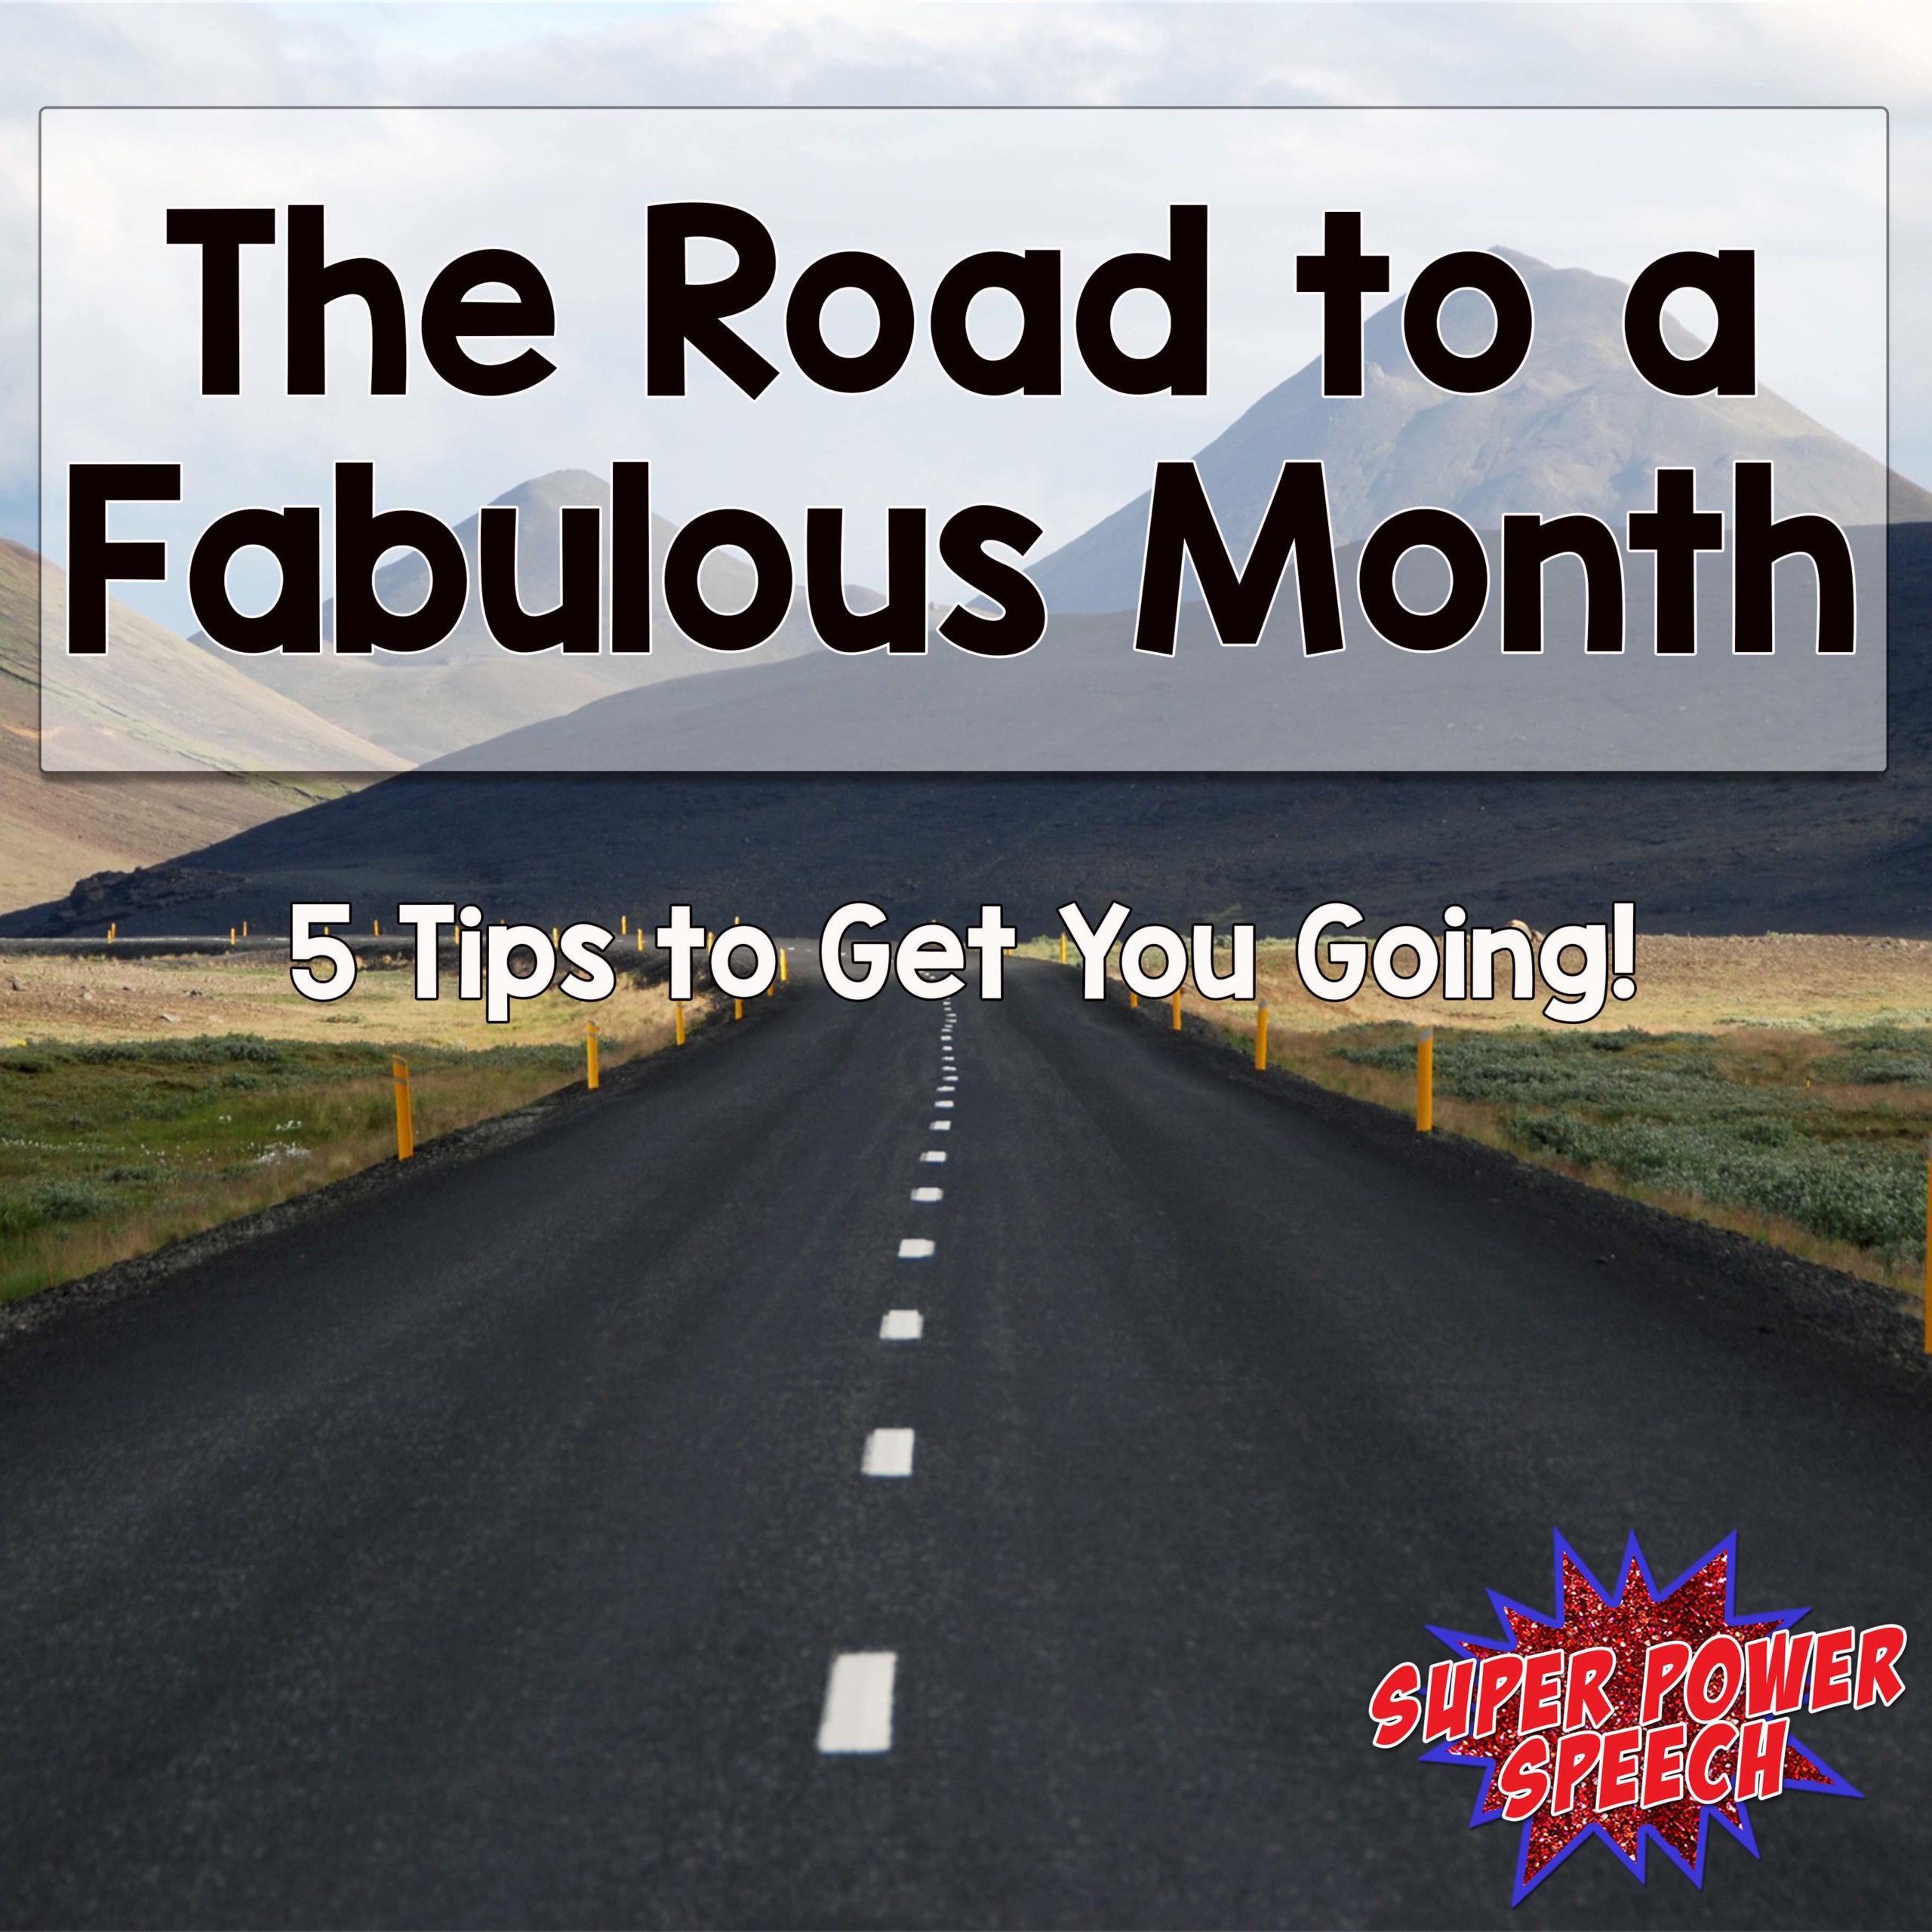 The Road to a Fabulous Month